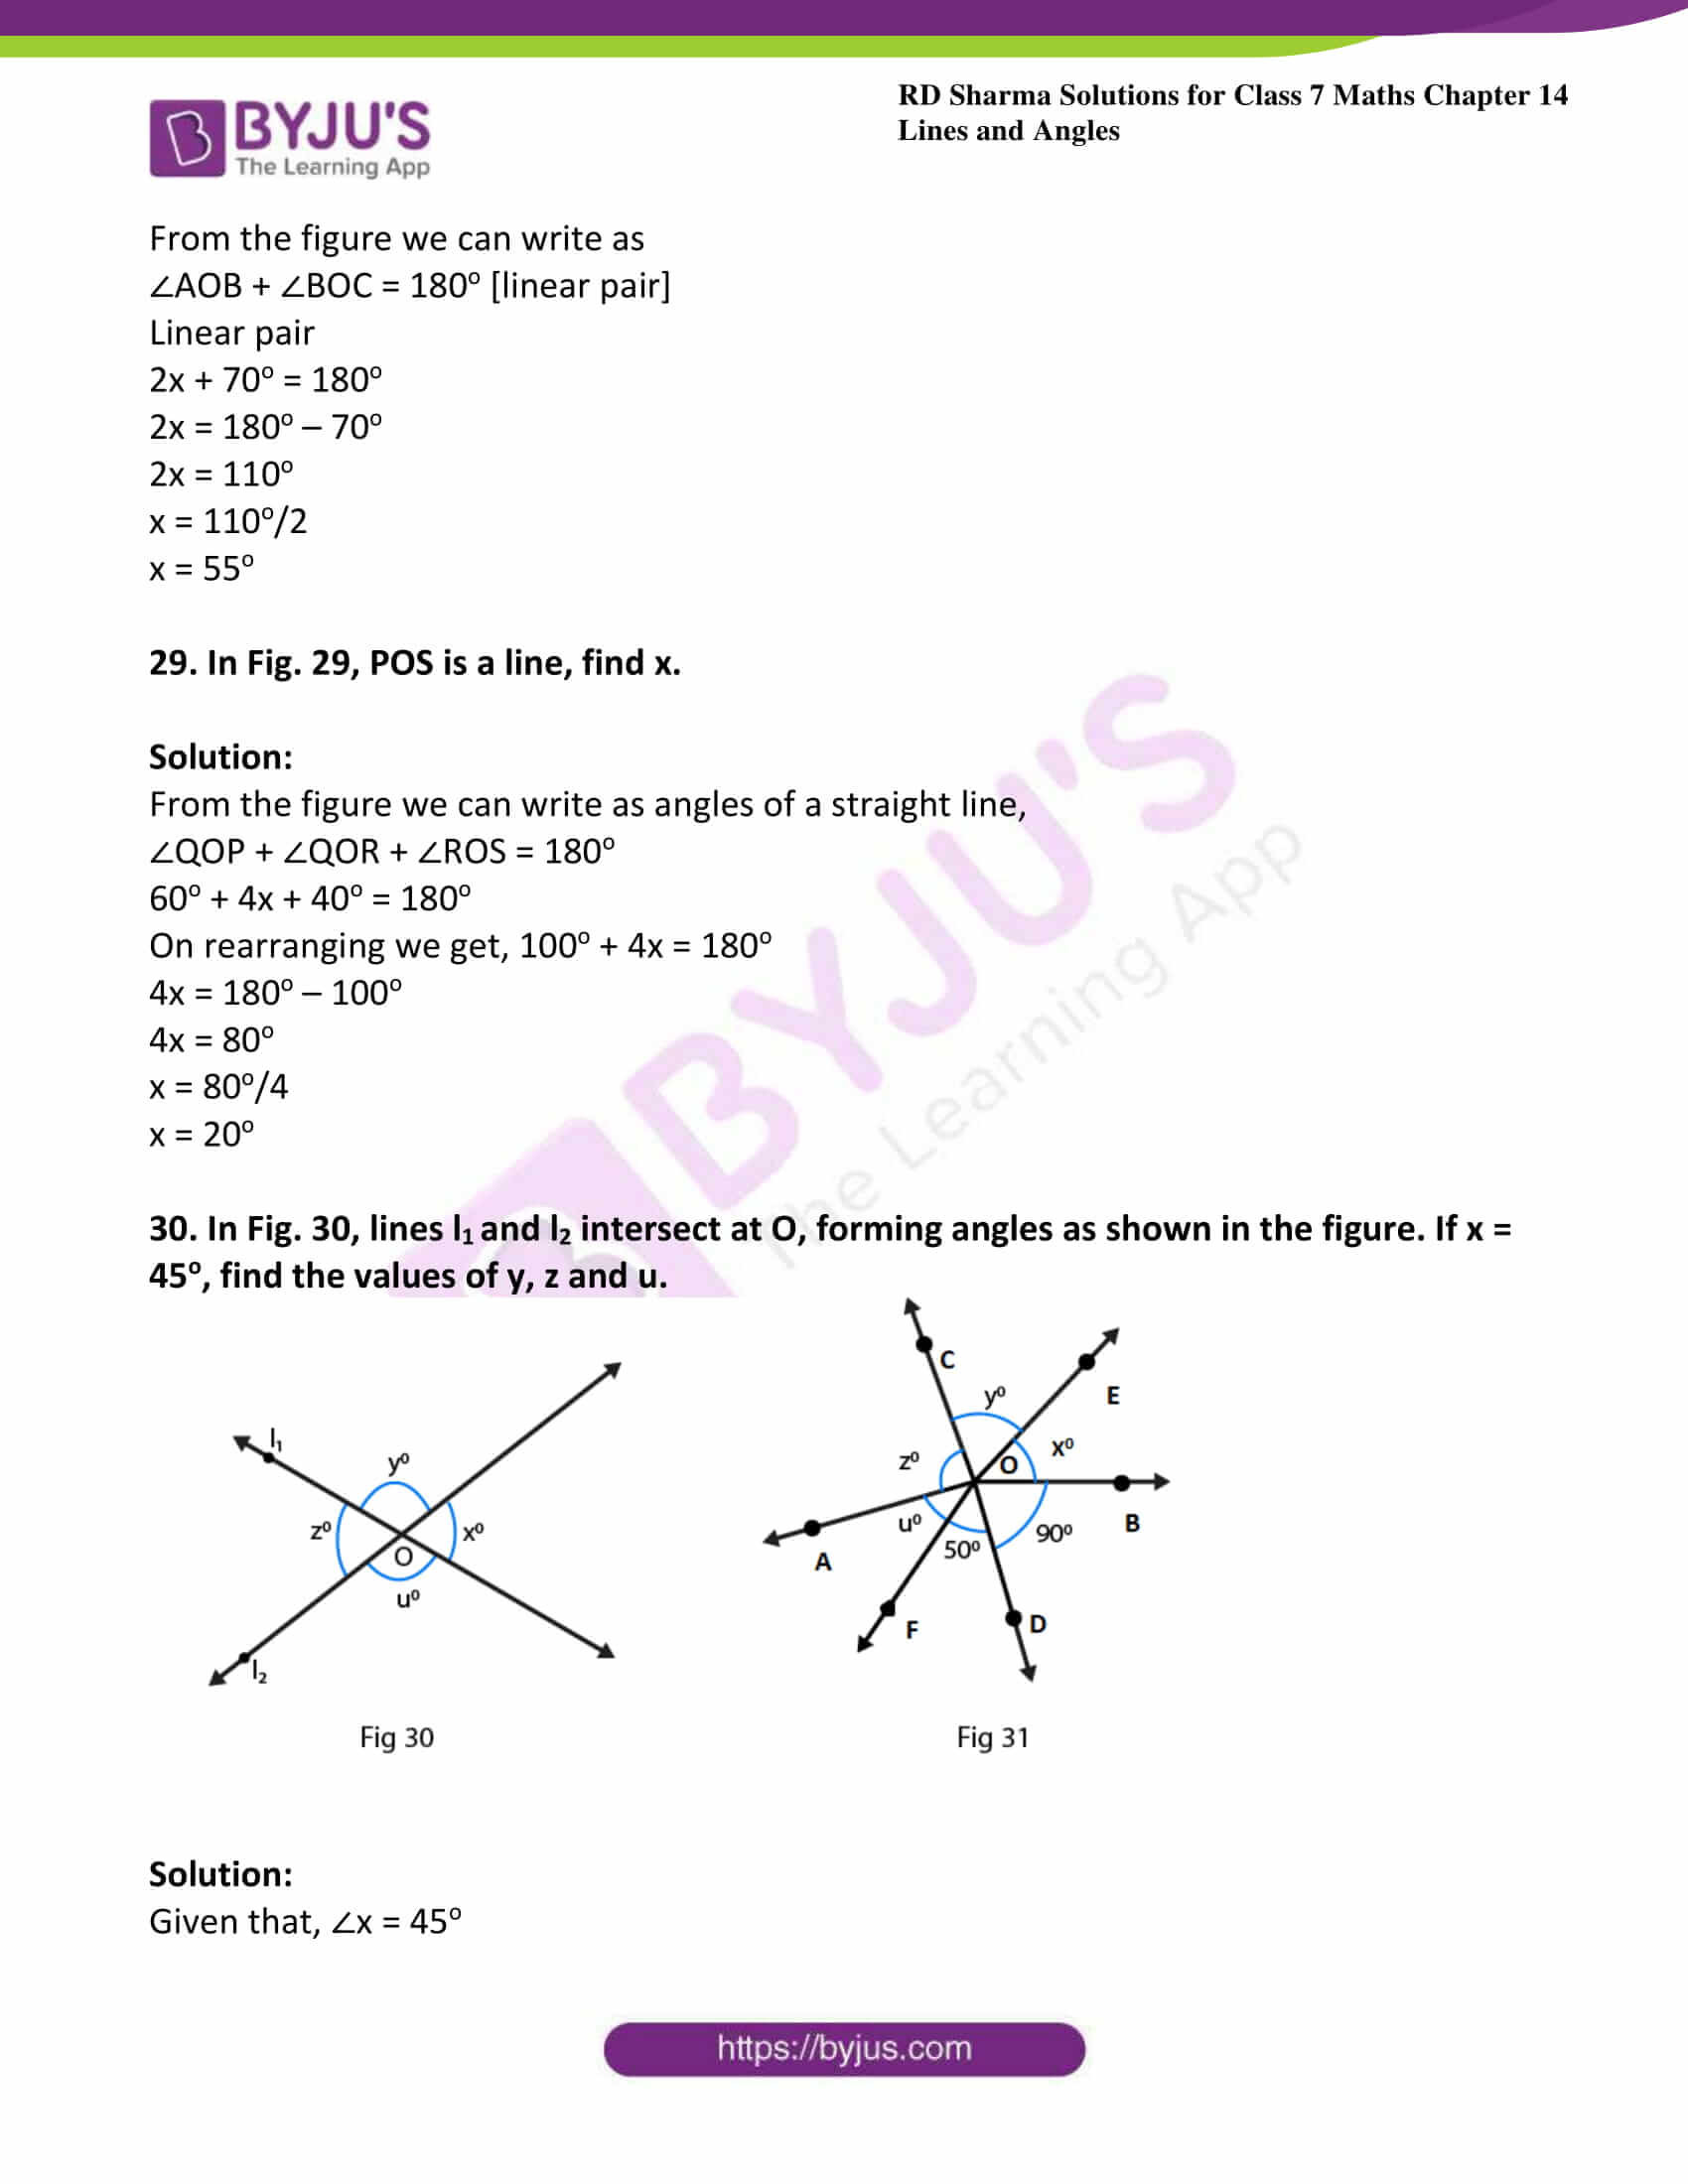 Lines and Angles Worksheet Rd Sharma solutions for Class 7 Maths Chapter 14 Lines and